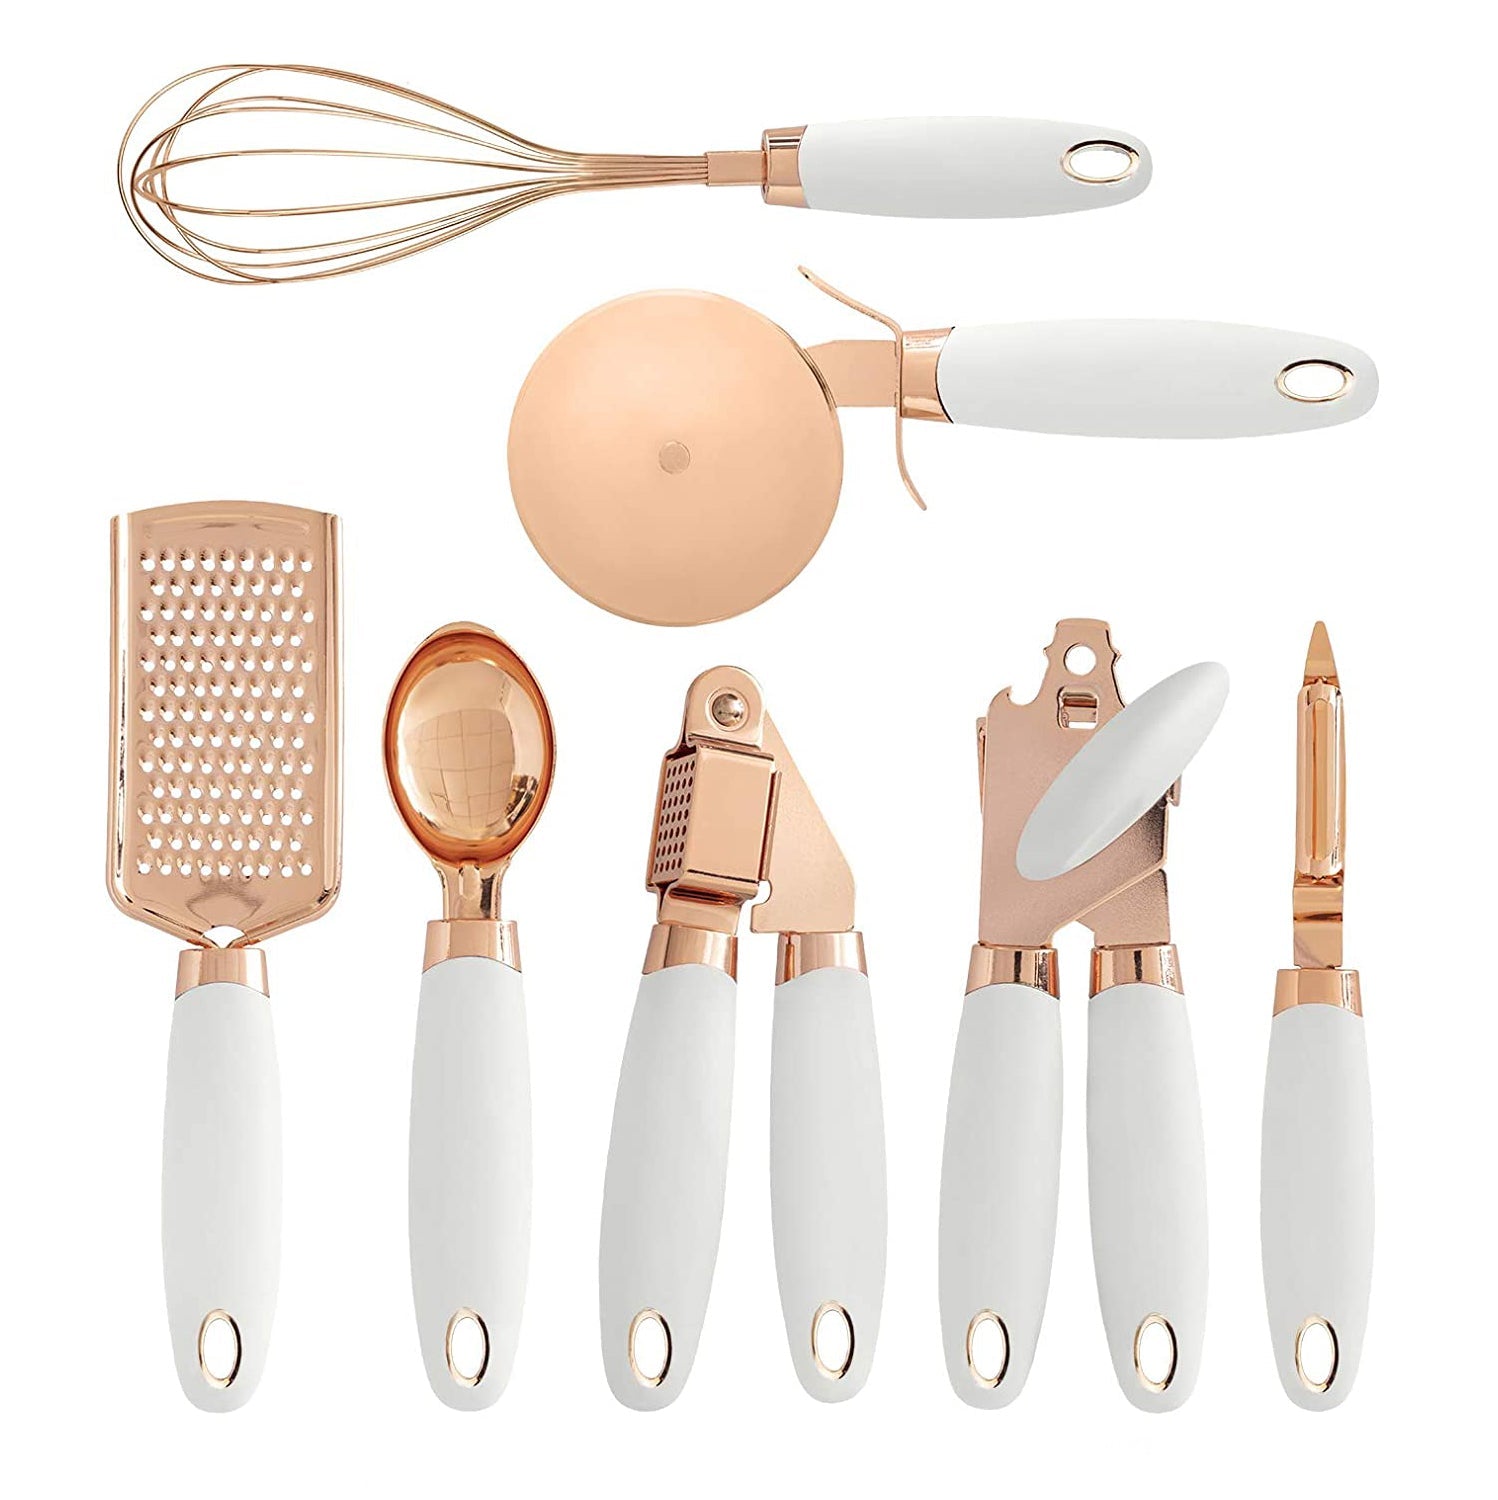 SKYTONE Kitchen Tools 7 Pcs Pure Copper Soft Silicone Touch Handles (White color)